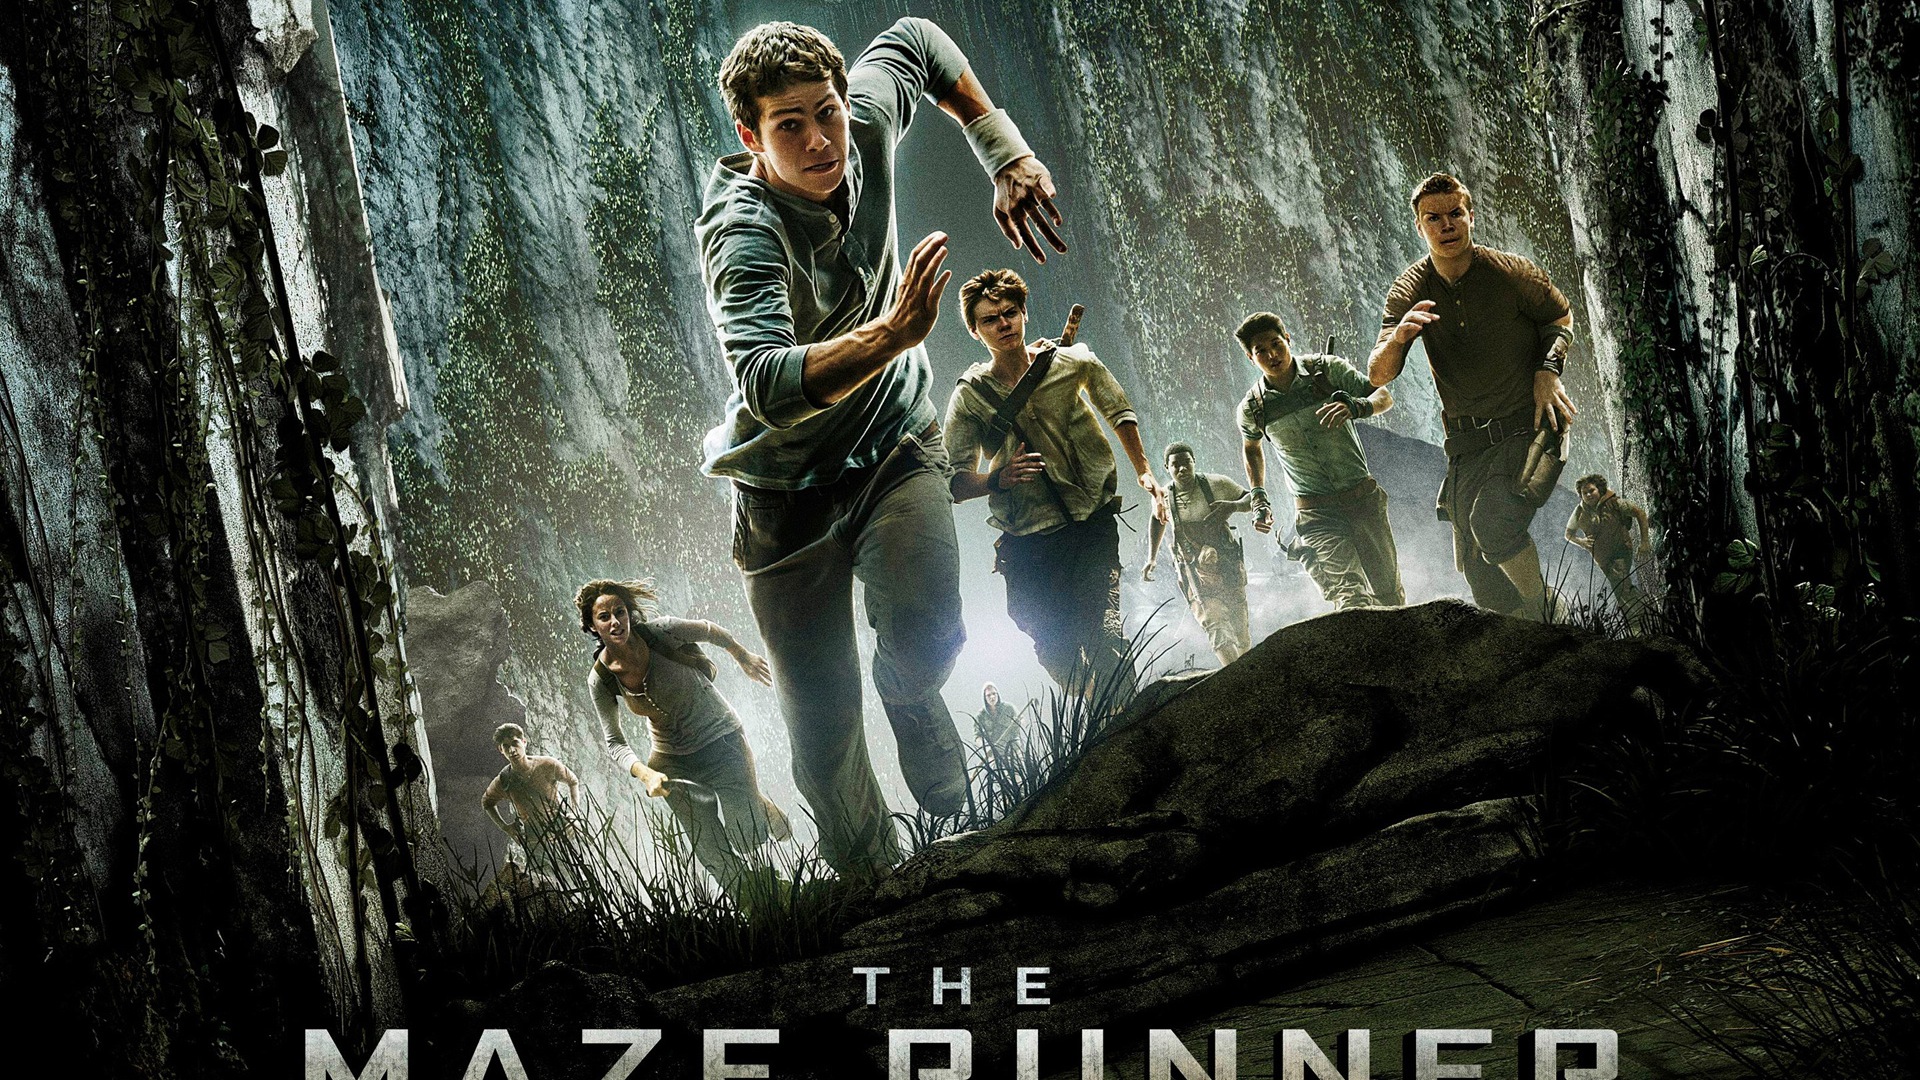 The Maze Runner HD movie wallpapers #2 - 1920x1080